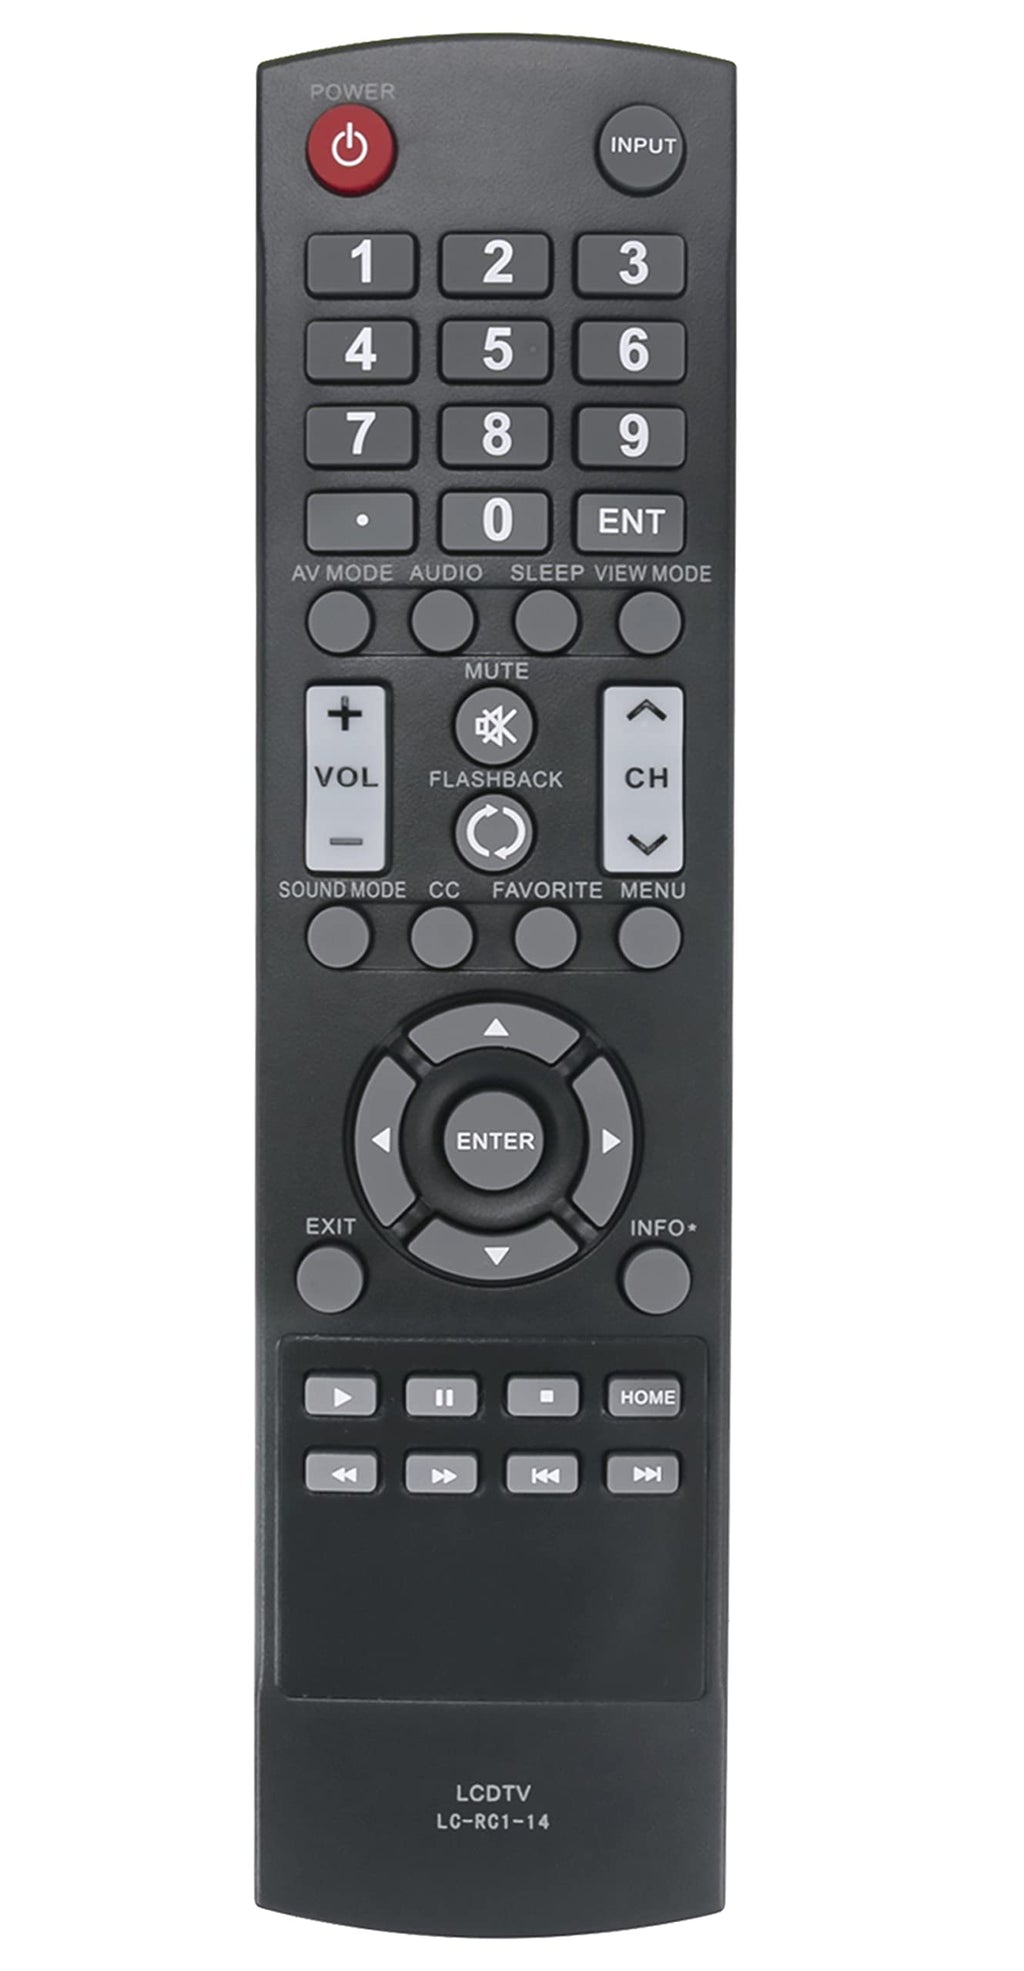 New LC-RC1-14 LCRC114 Replaced Remote fit for Sharp TV LC50LB150U LC50LB261U LC-32LB150 LC-32LB261 LC-42LB150U LC-42LB261U LC-50LB150U LC-50LB261U LC32LB150U LC32LB261 LC32LB261U LC42LB150